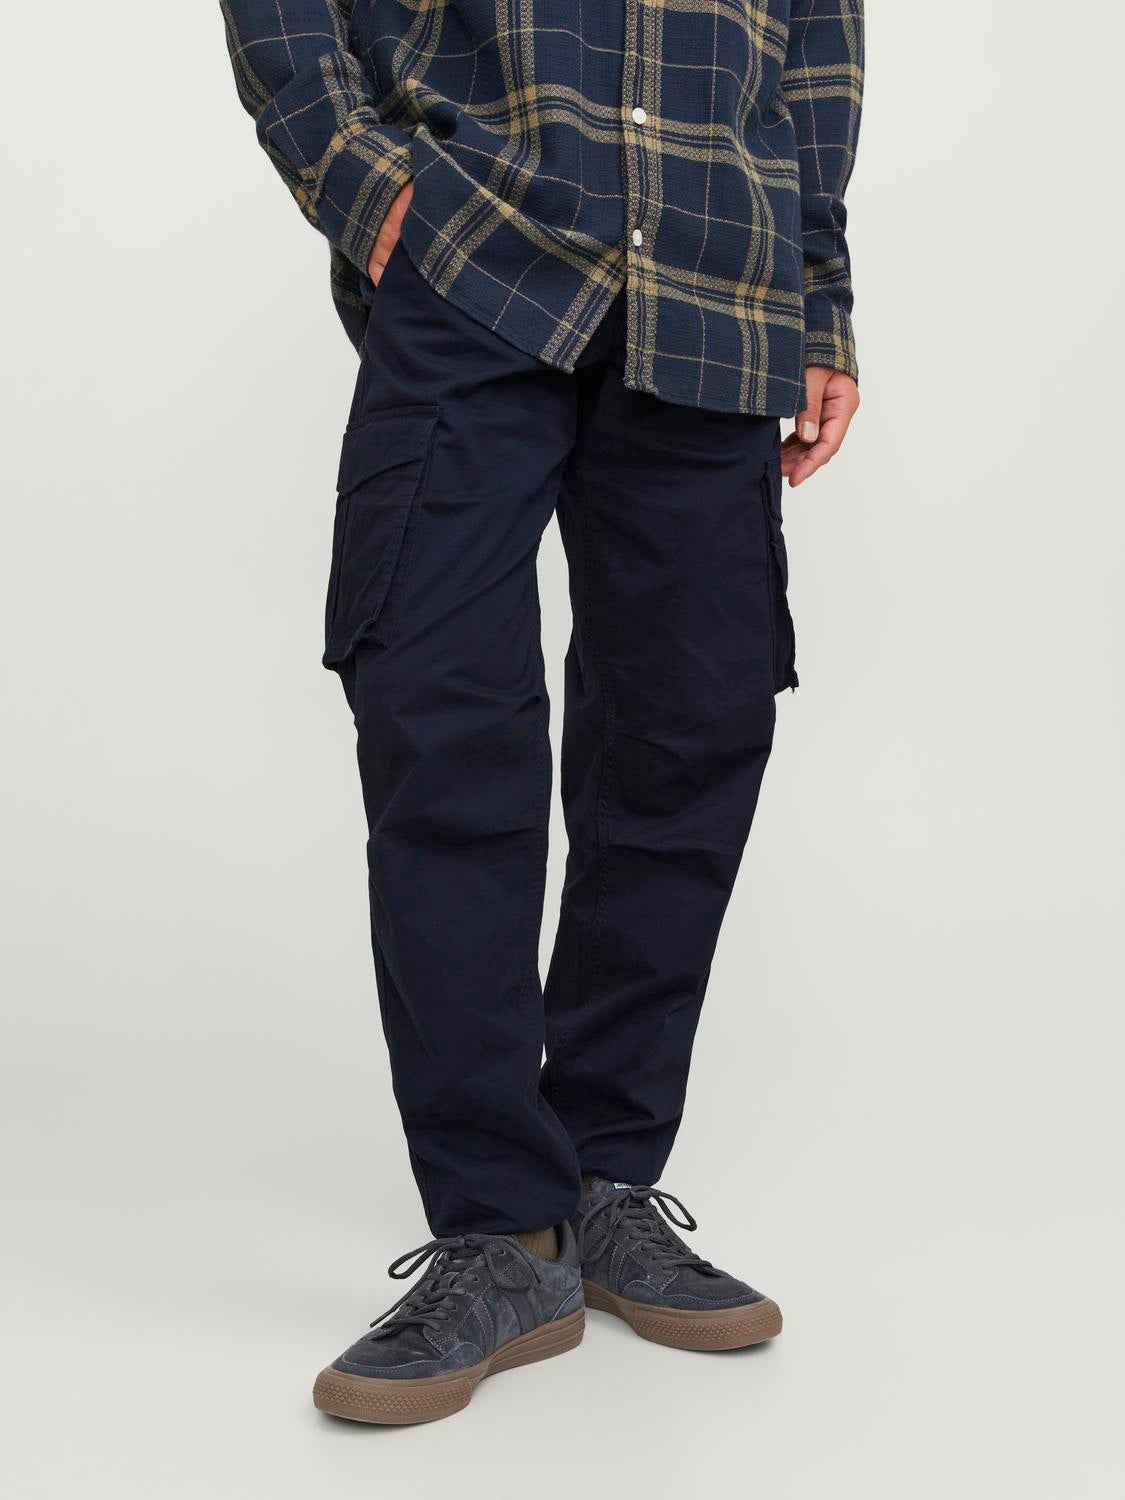 Tommy Jeans Ethan cargo trousers in navy | ASOS